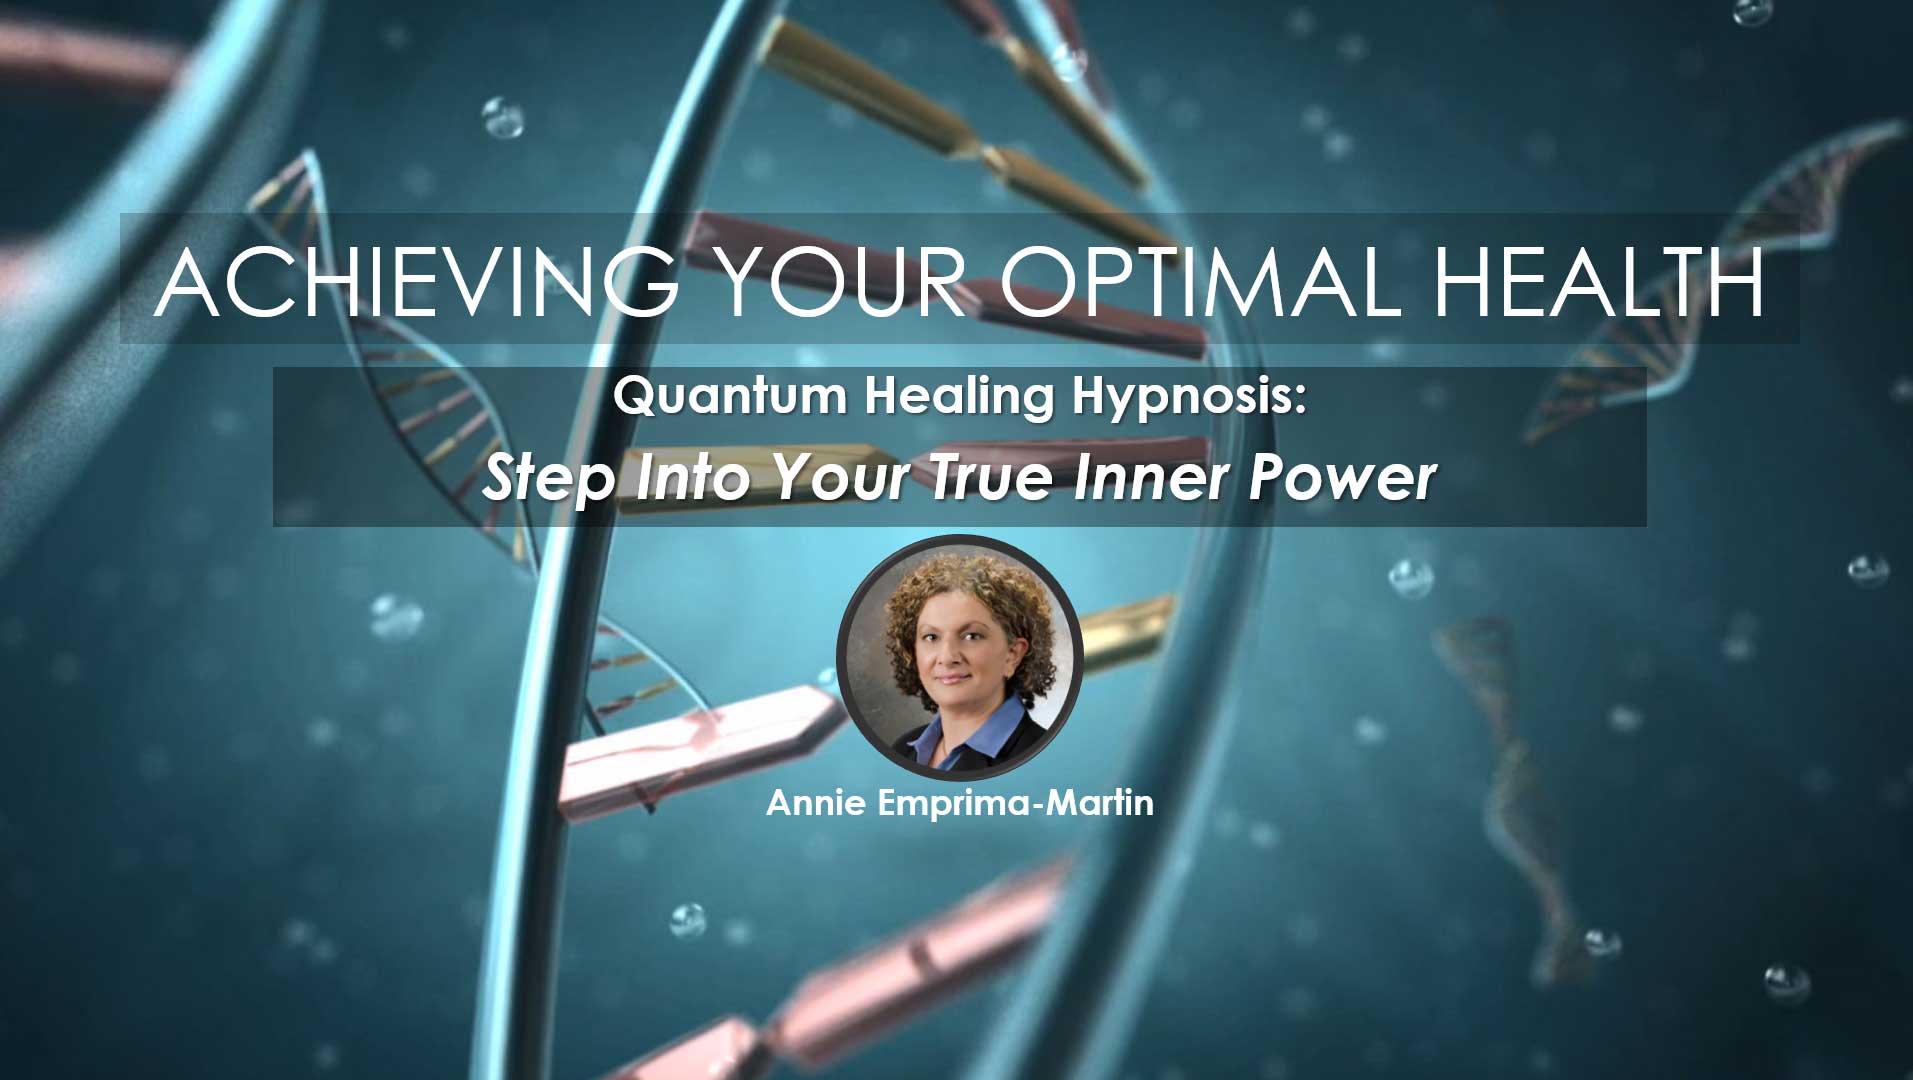 Quantum Healing Hypnosis with Annie Emprima-Martin, Webinar in Series "Achieving Your Optimal Health"